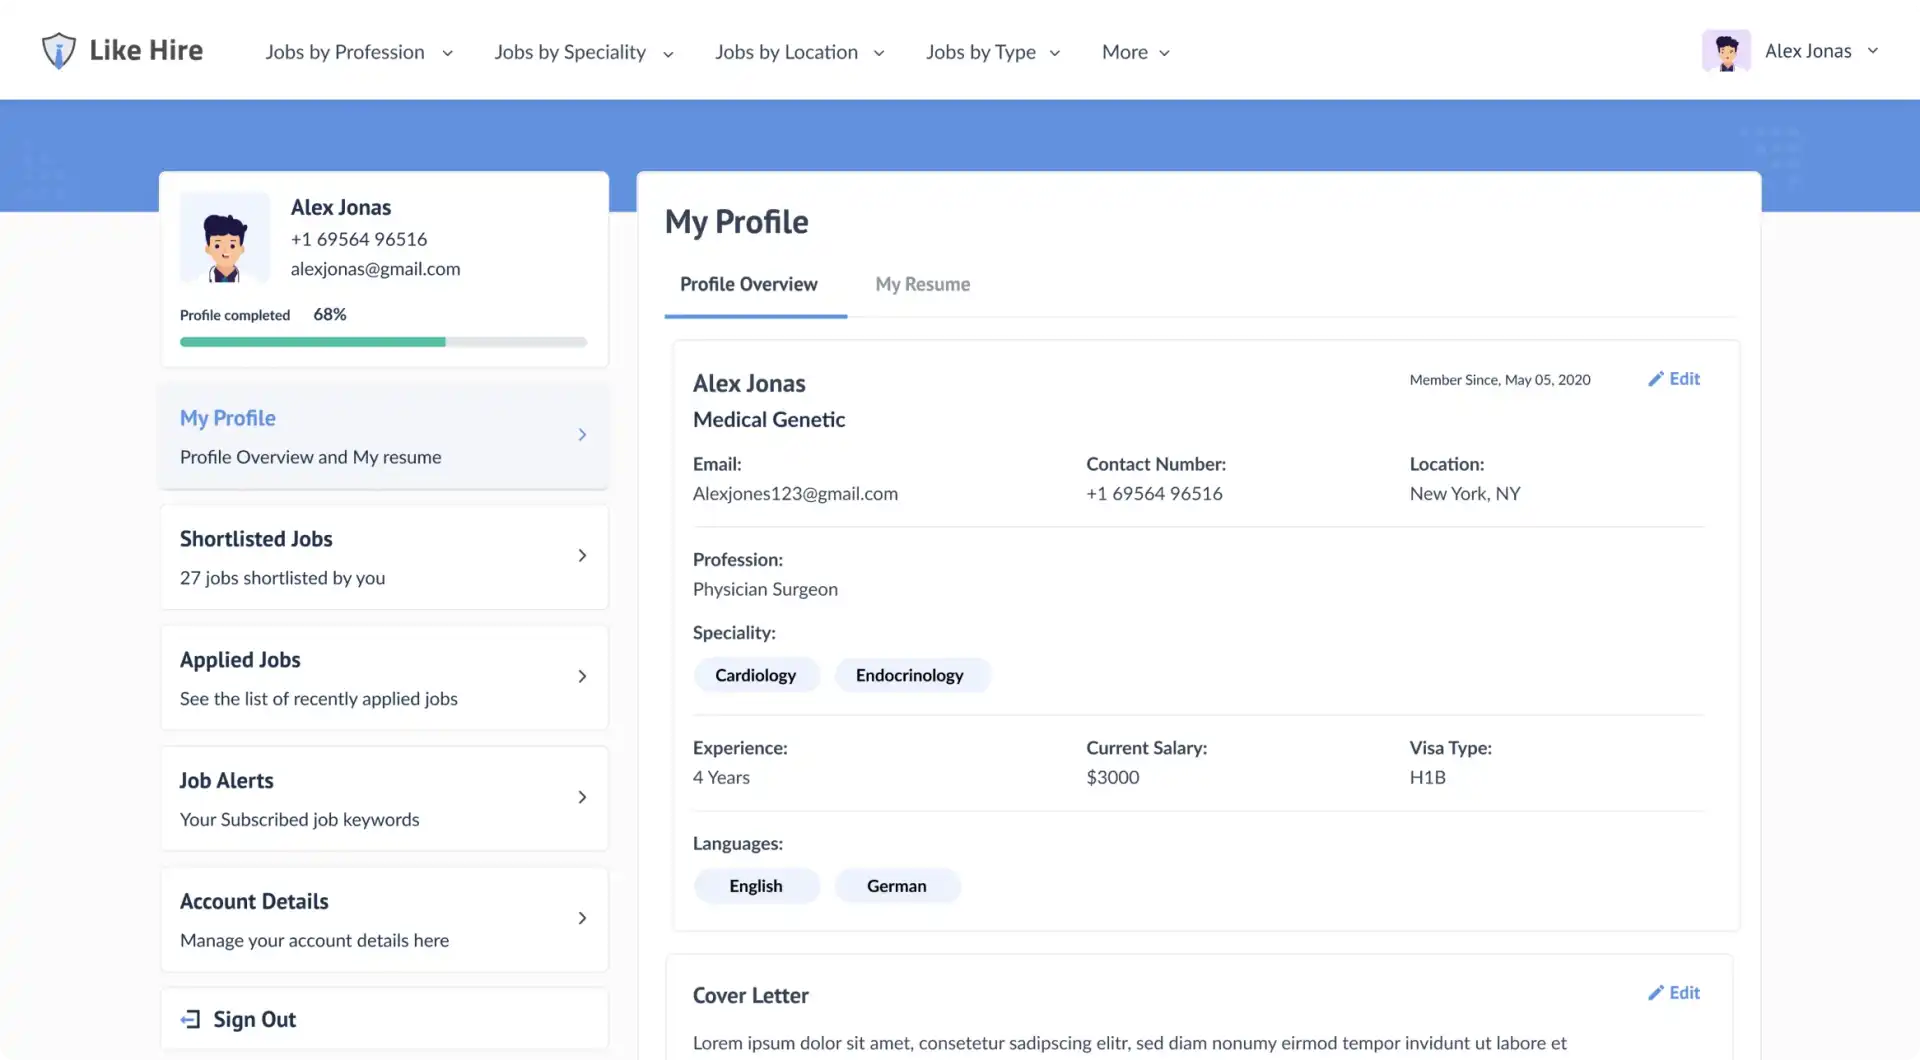 UI Screen to get profile overview of the candidate